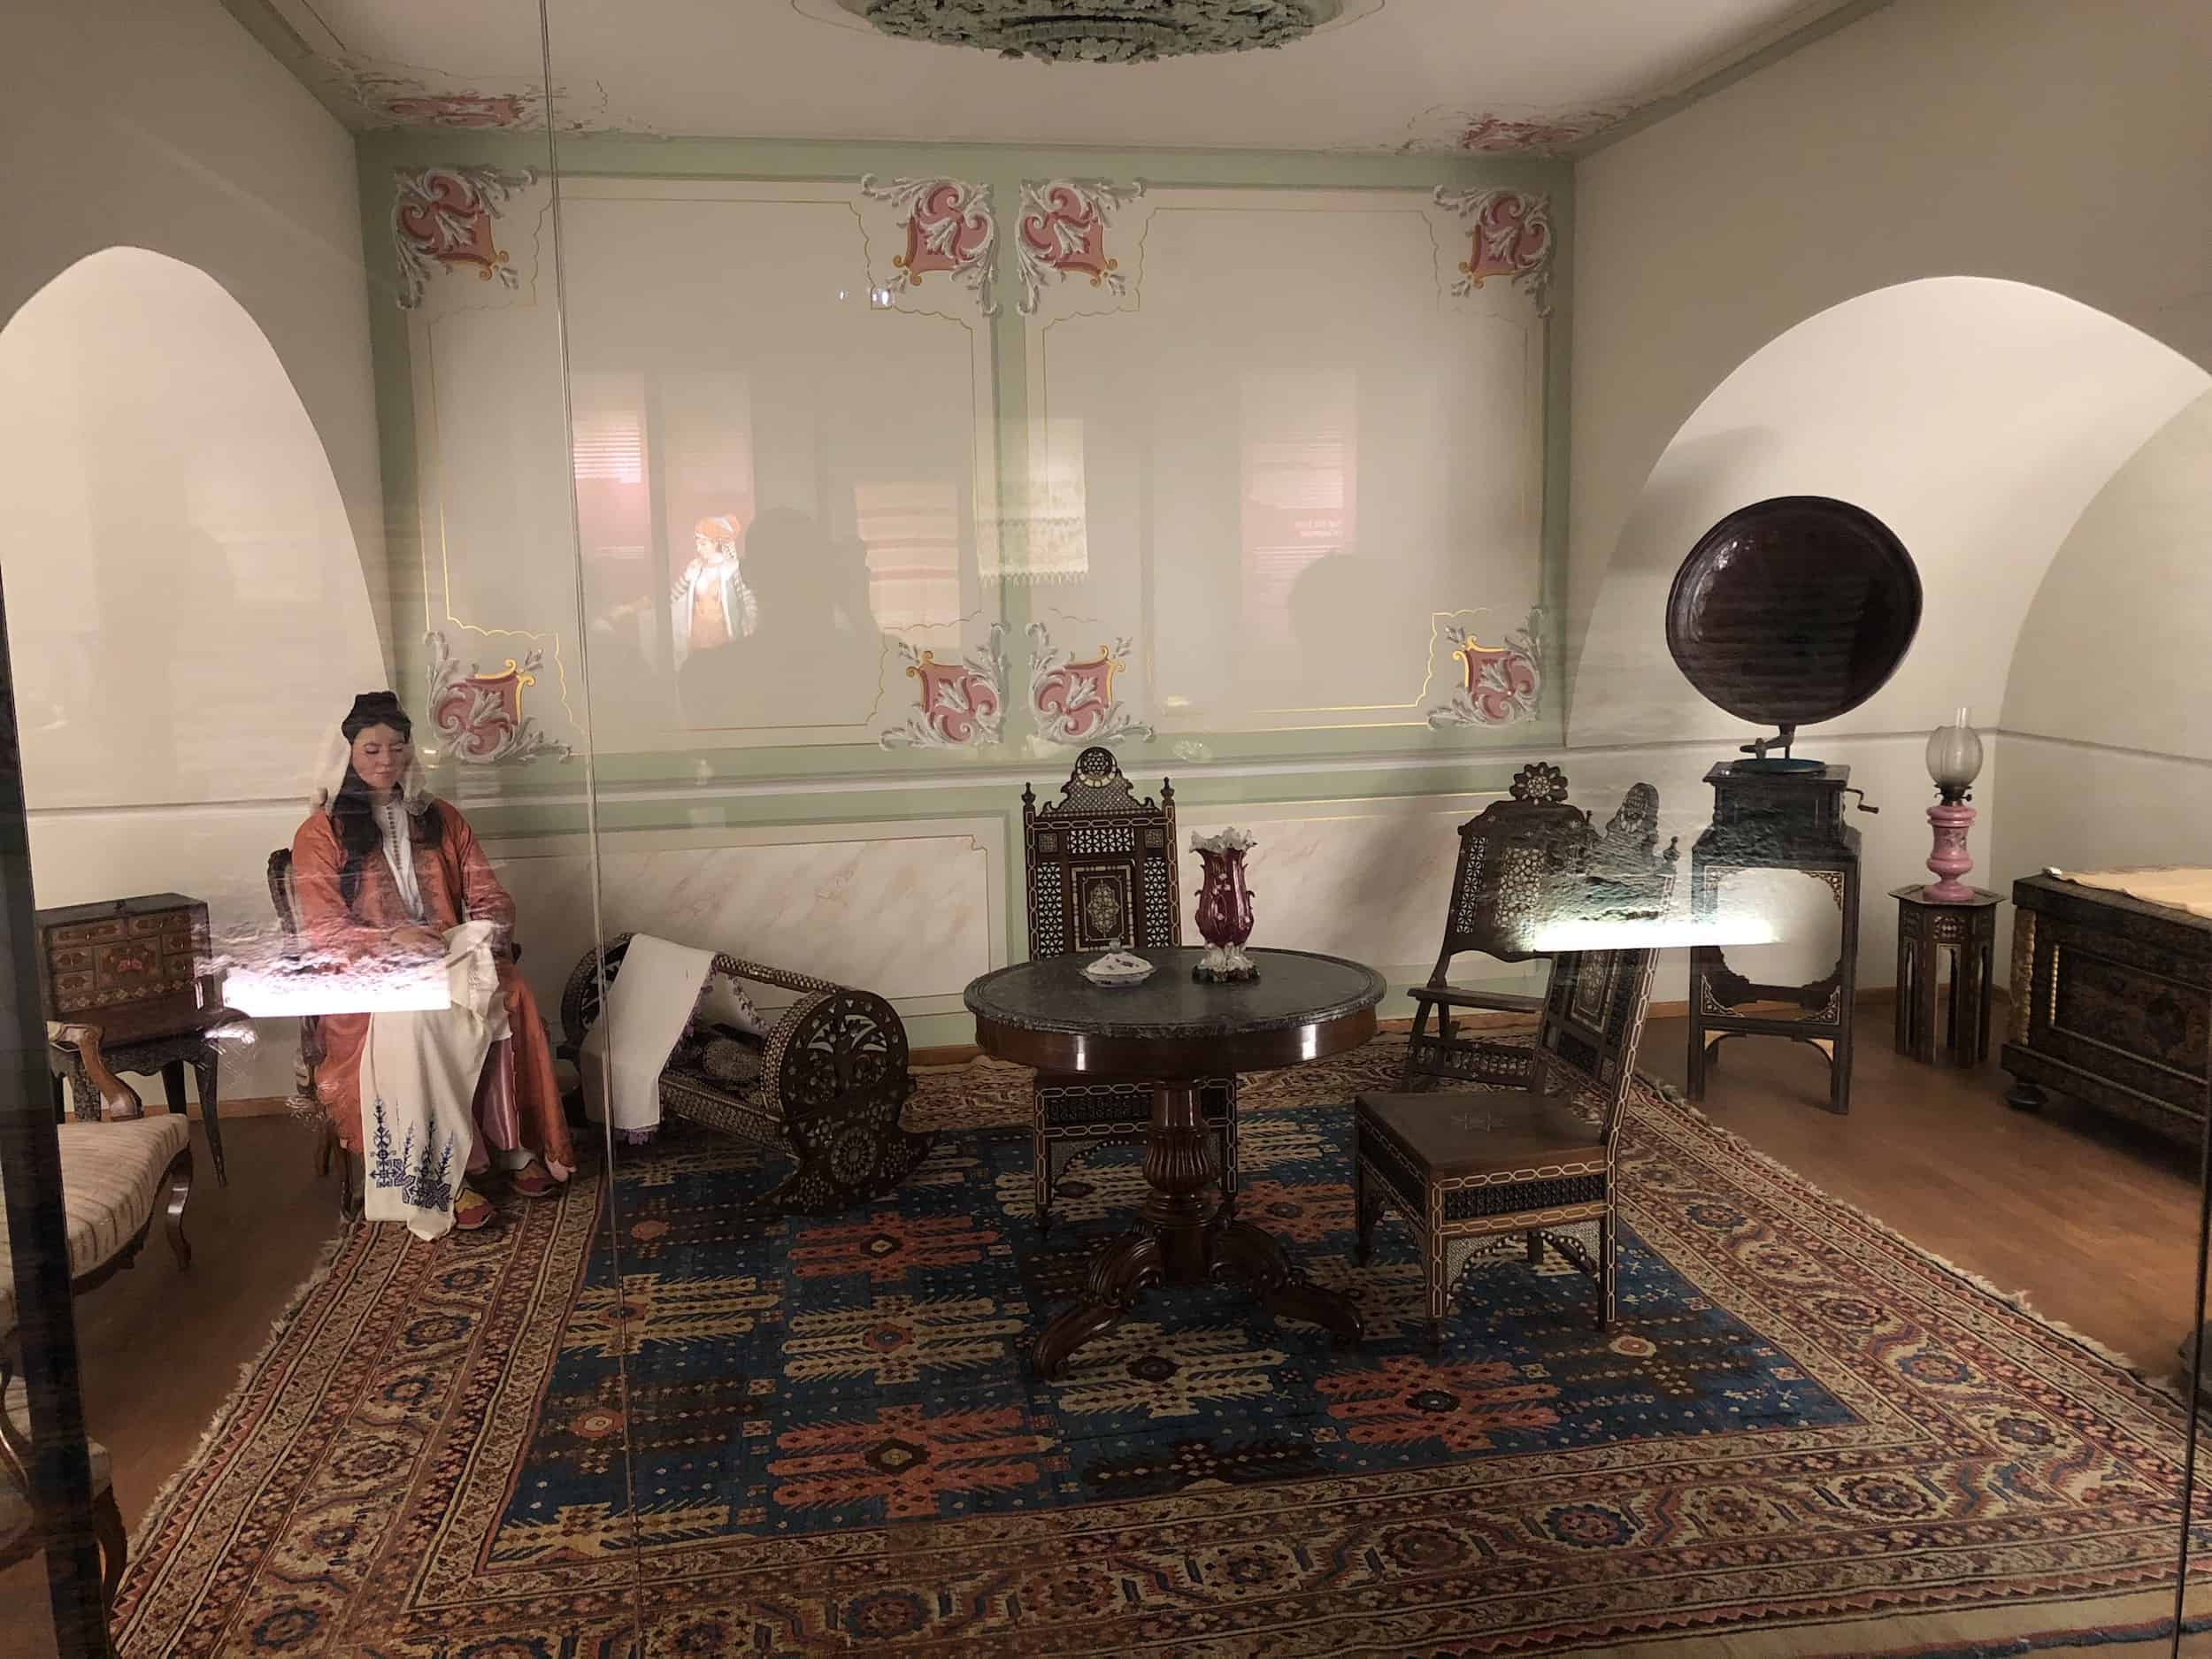 19th century mansion in the ethnographic collection at the Museum of Turkish and Islamic Arts in Istanbul, Turkey